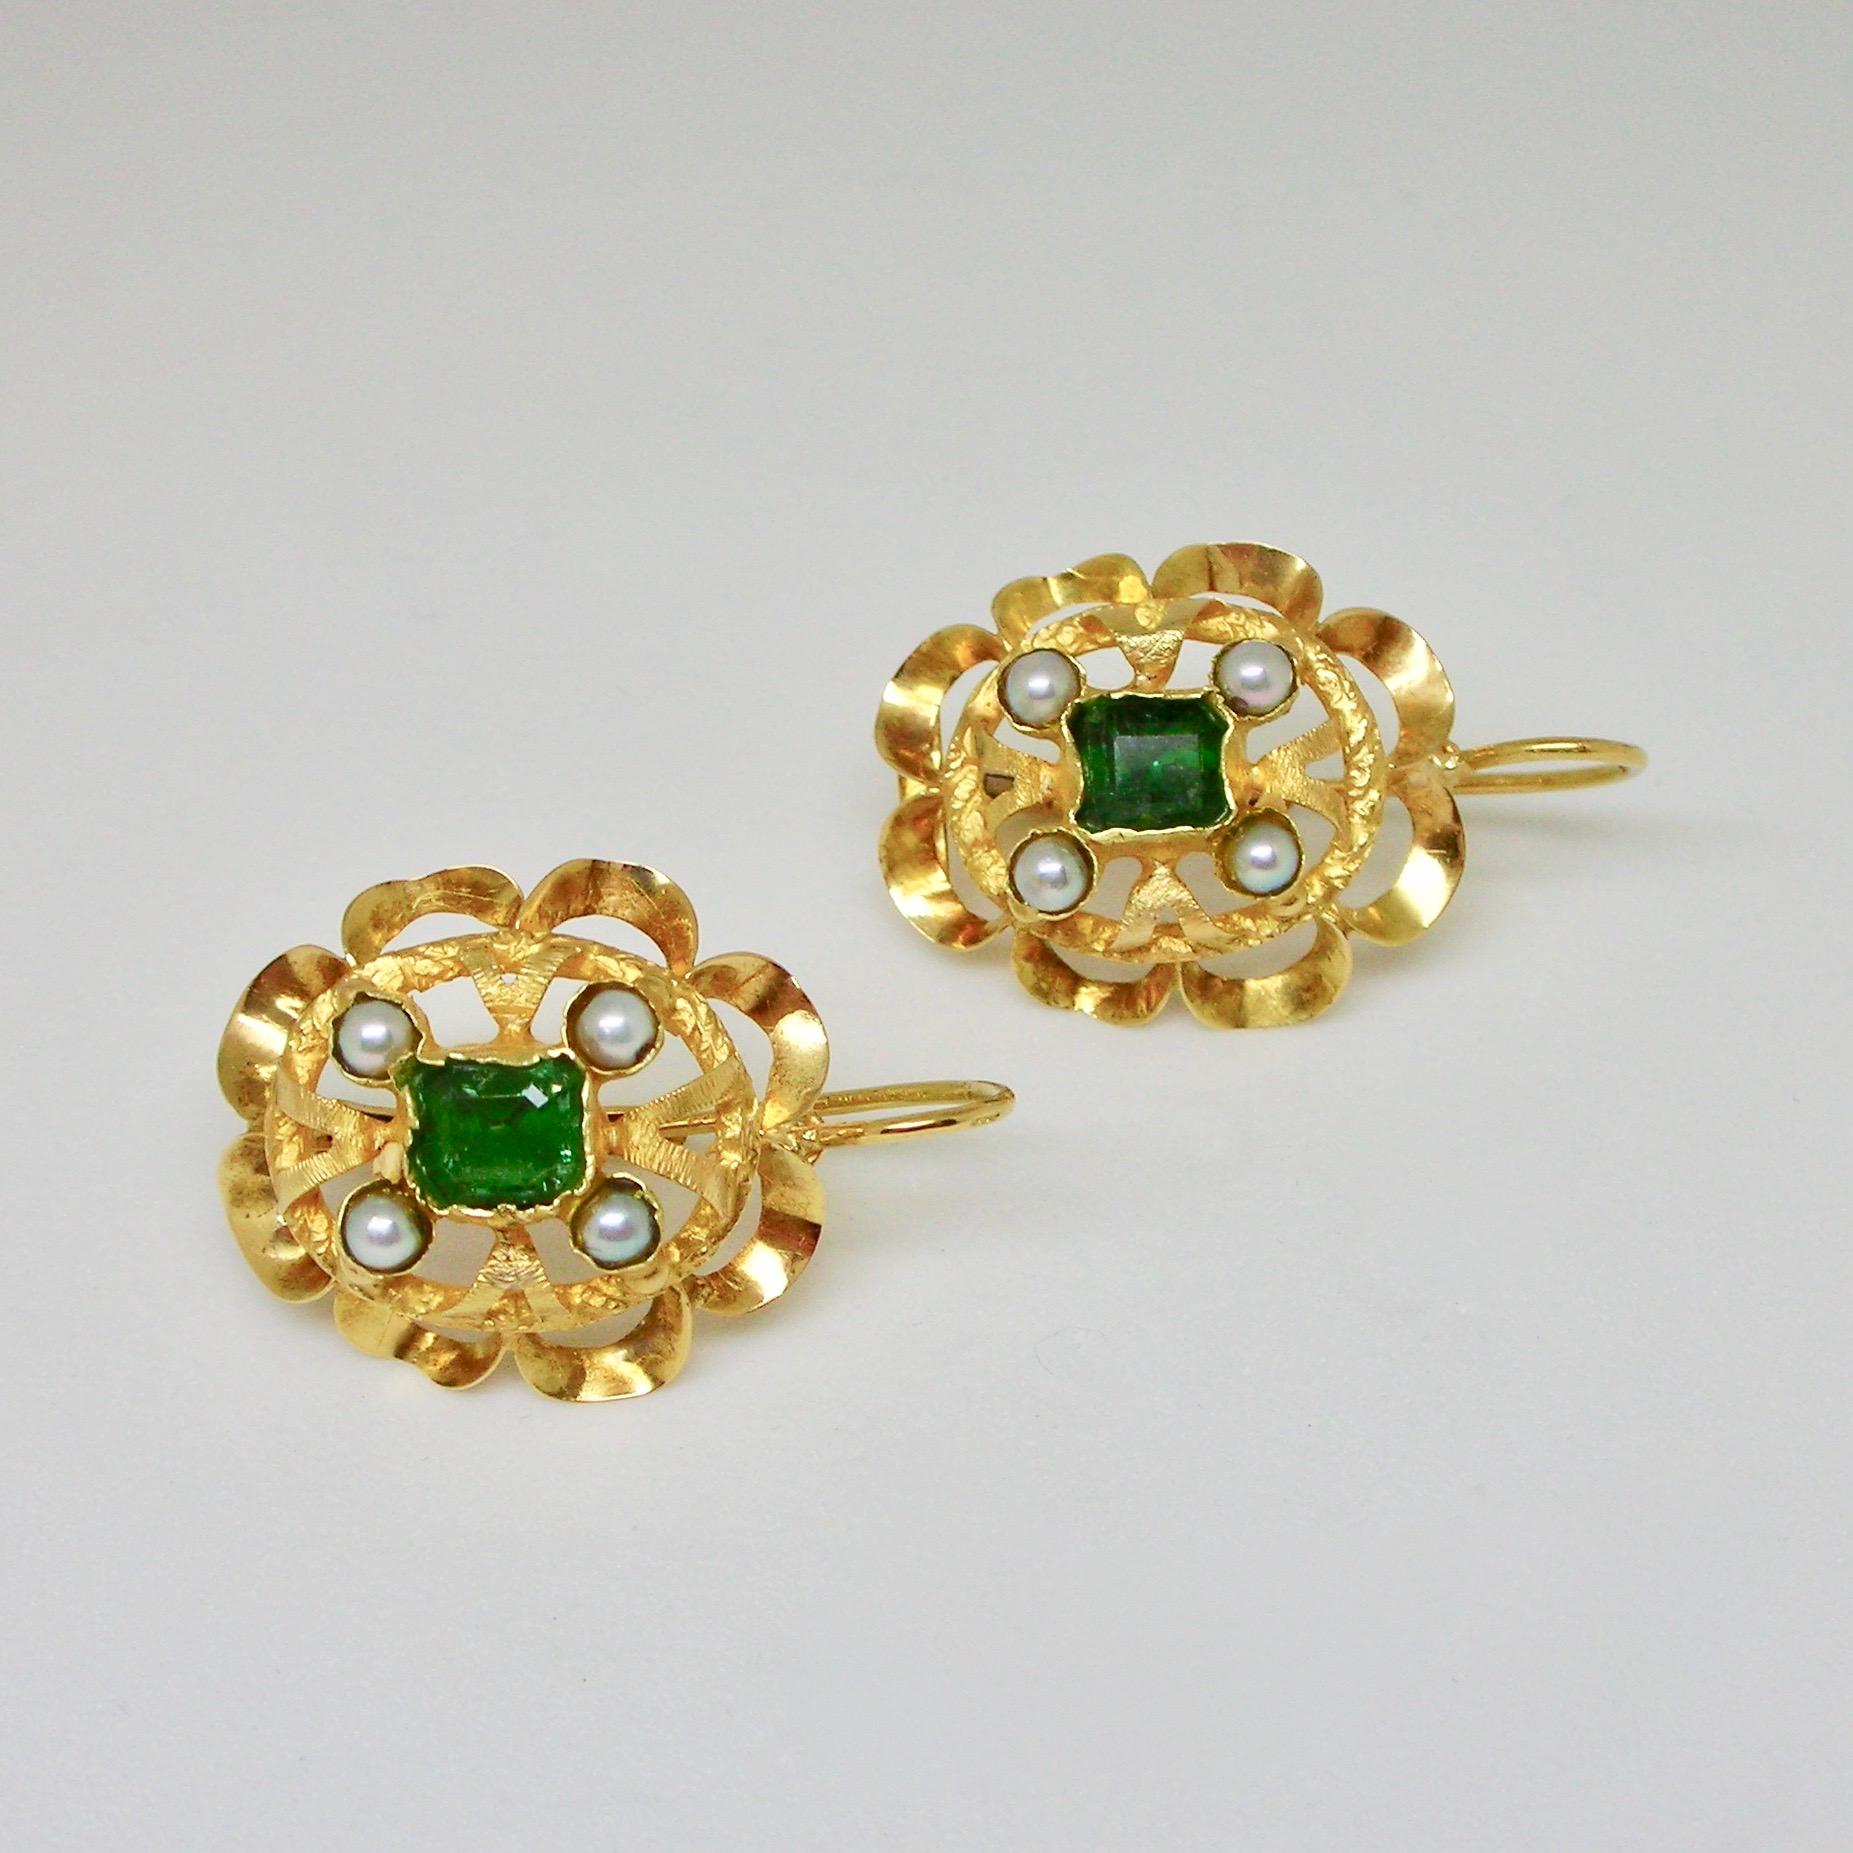 Earrings set in 18kt gold with natural emeralds and small cultured pearls. With lever back fastening, 1970s circa of probable Italian provenance.